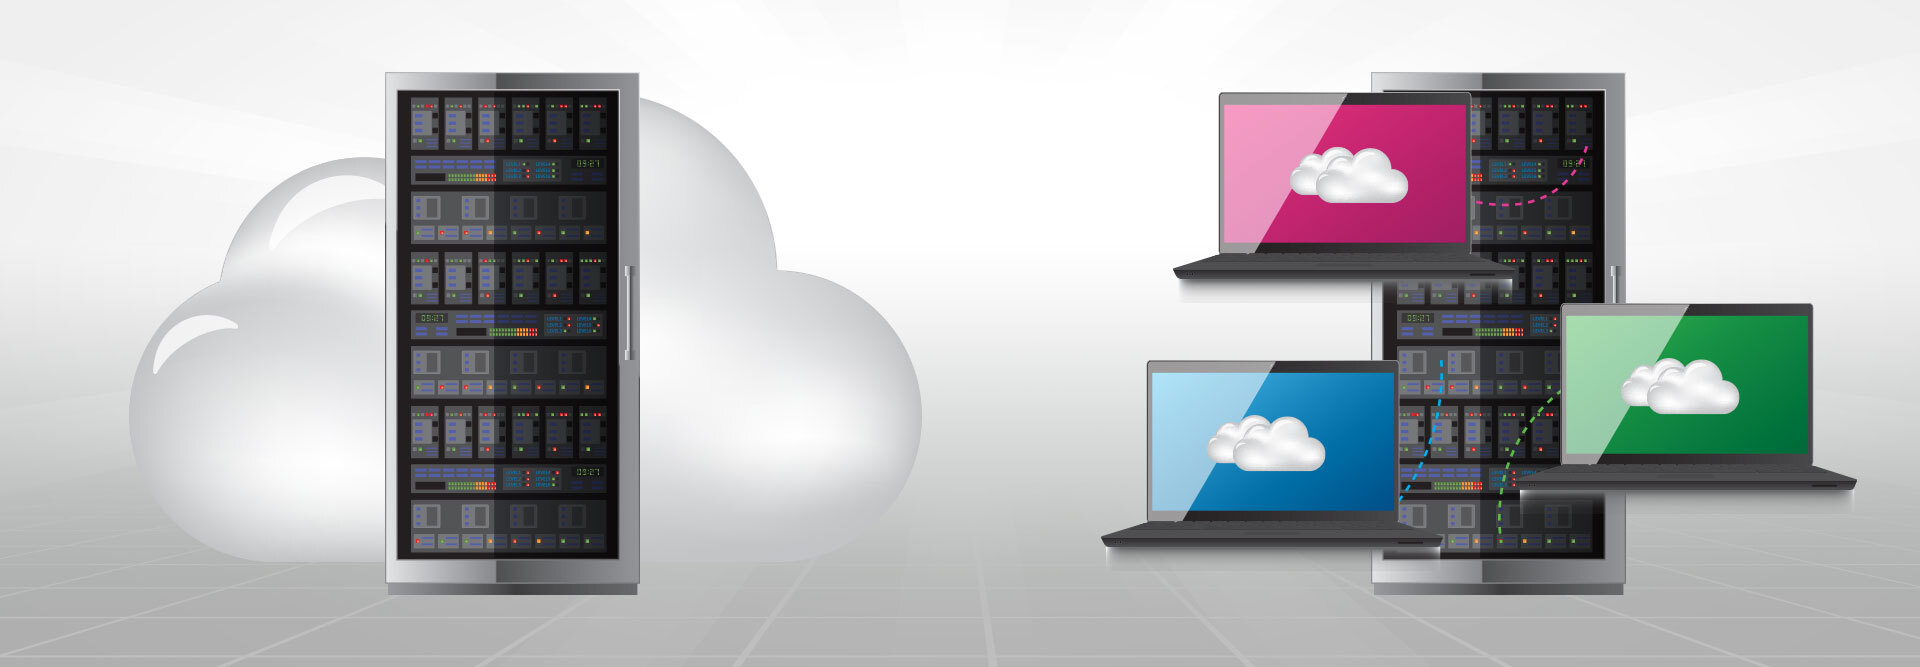 A website server with a cloud behind it to represent cloud hosting, and a server with multiple laptops floating around it to represent shared hosting